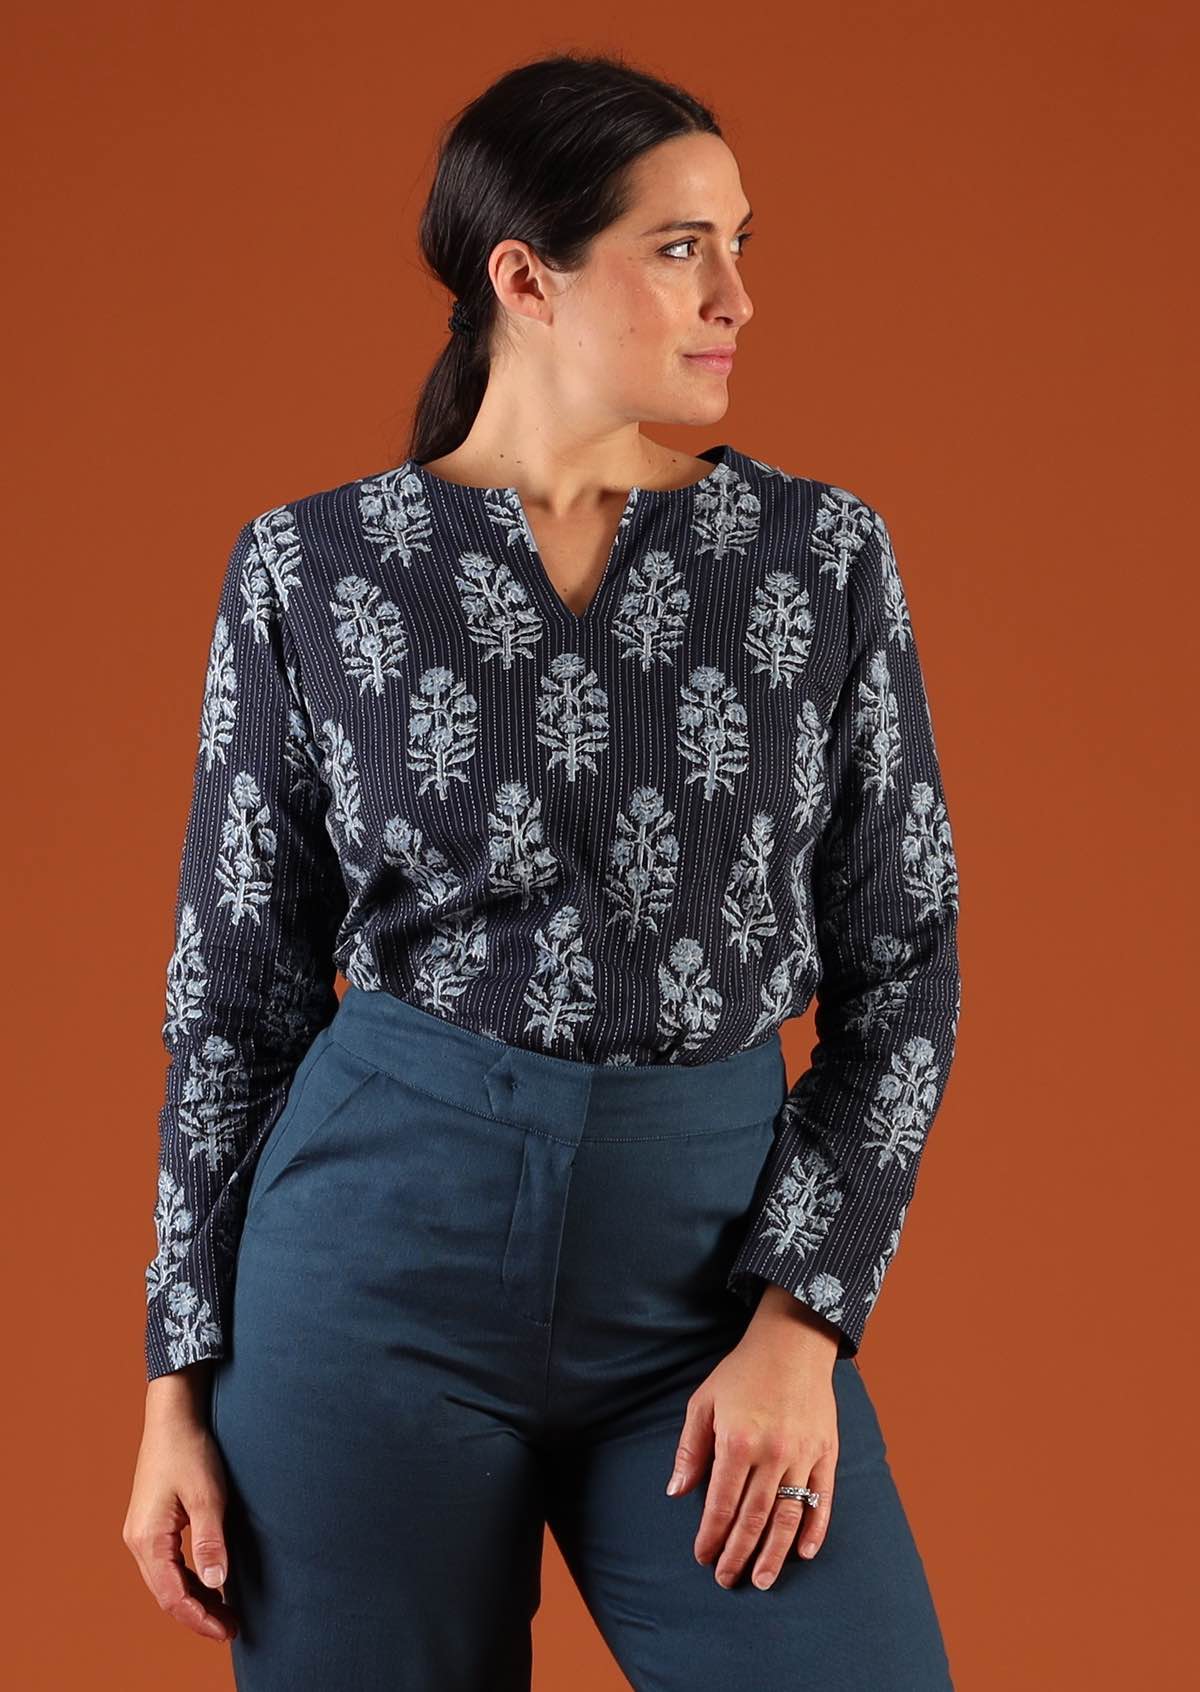 Model wearing Sophia Blouse Navy Blue cotton Indian print  tucked into teal cotton pants